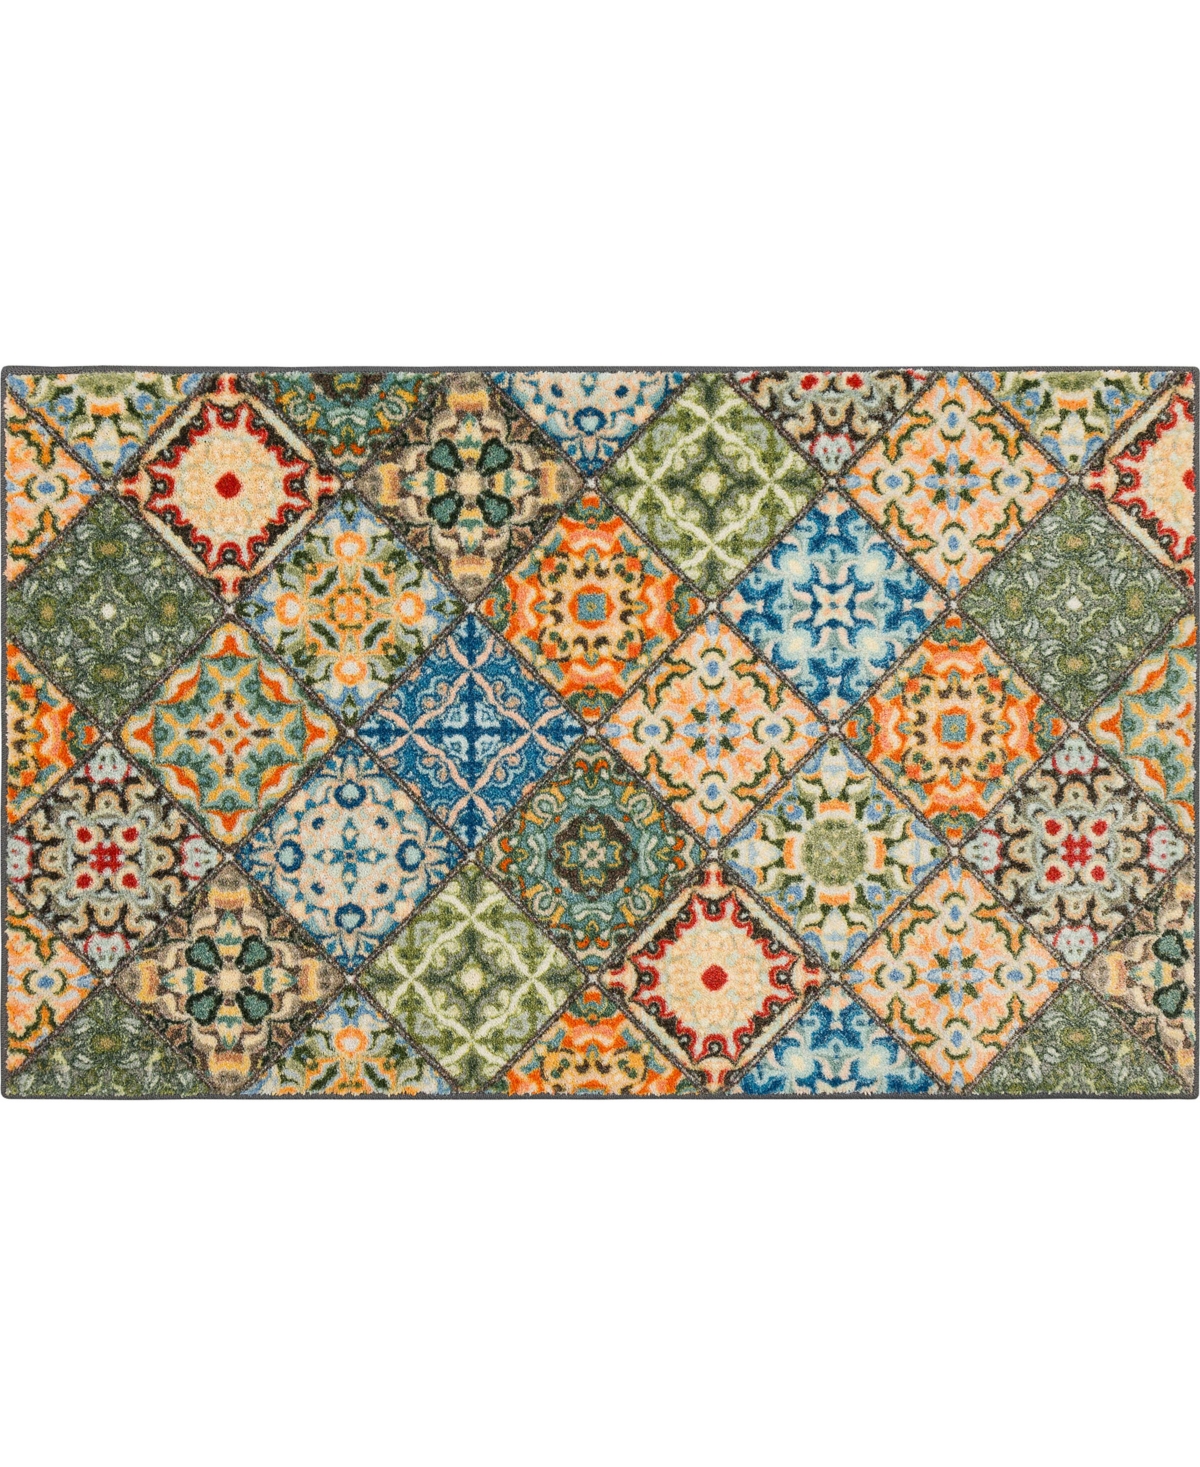 Mohawk Prismatic Moraccan Tile 2' X 3'4" Area Rug In Green